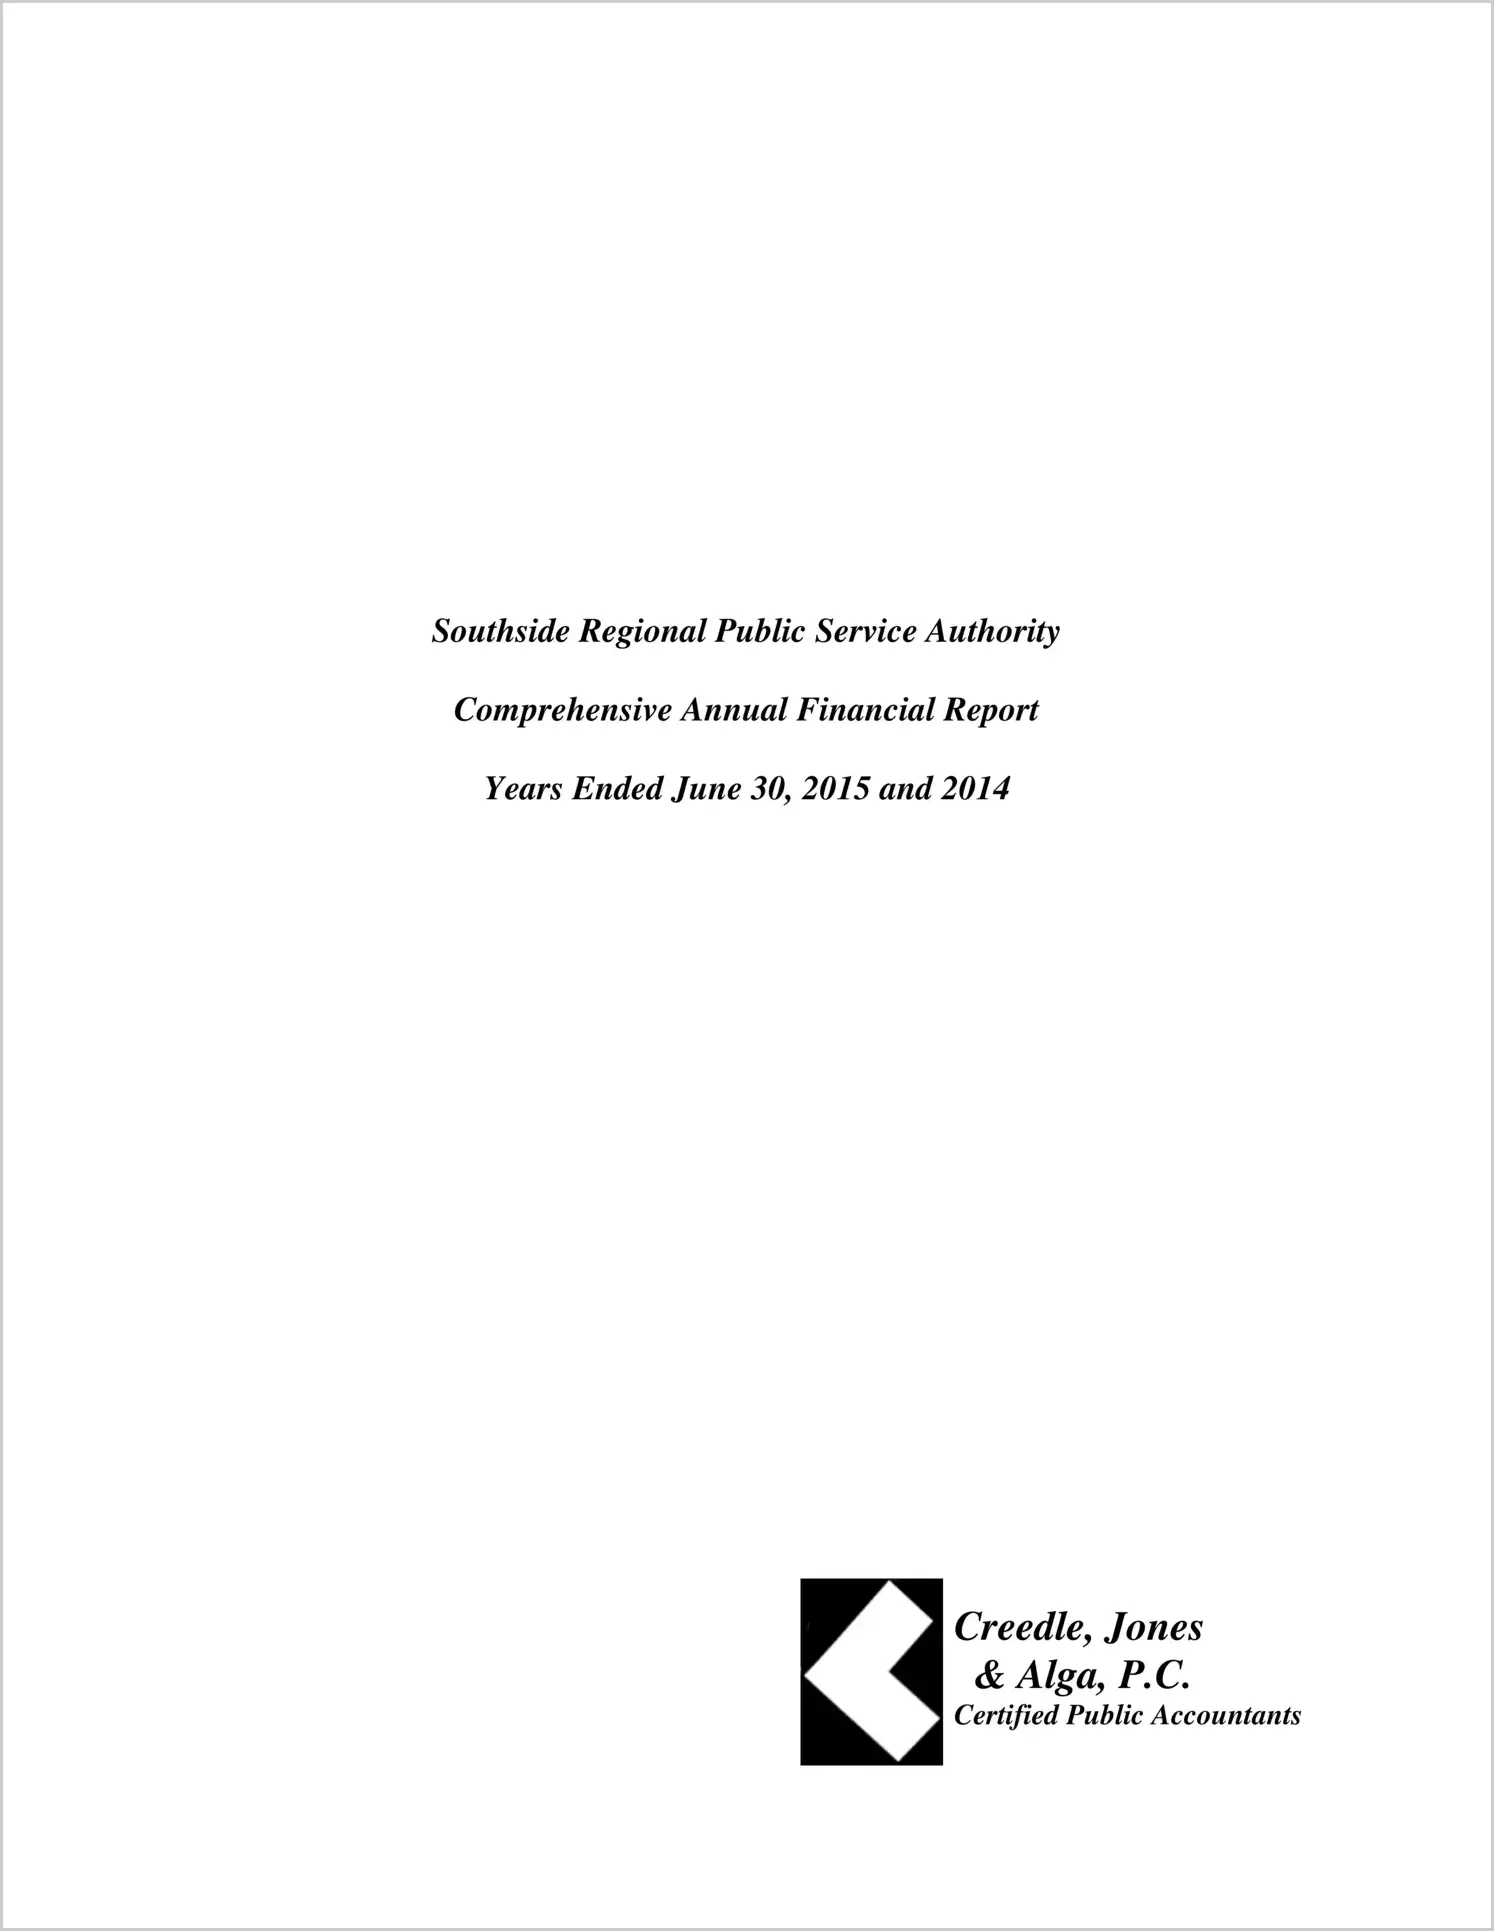 2015 ABC/Other Annual Financial Report  for Southside Regional Public Service Authority